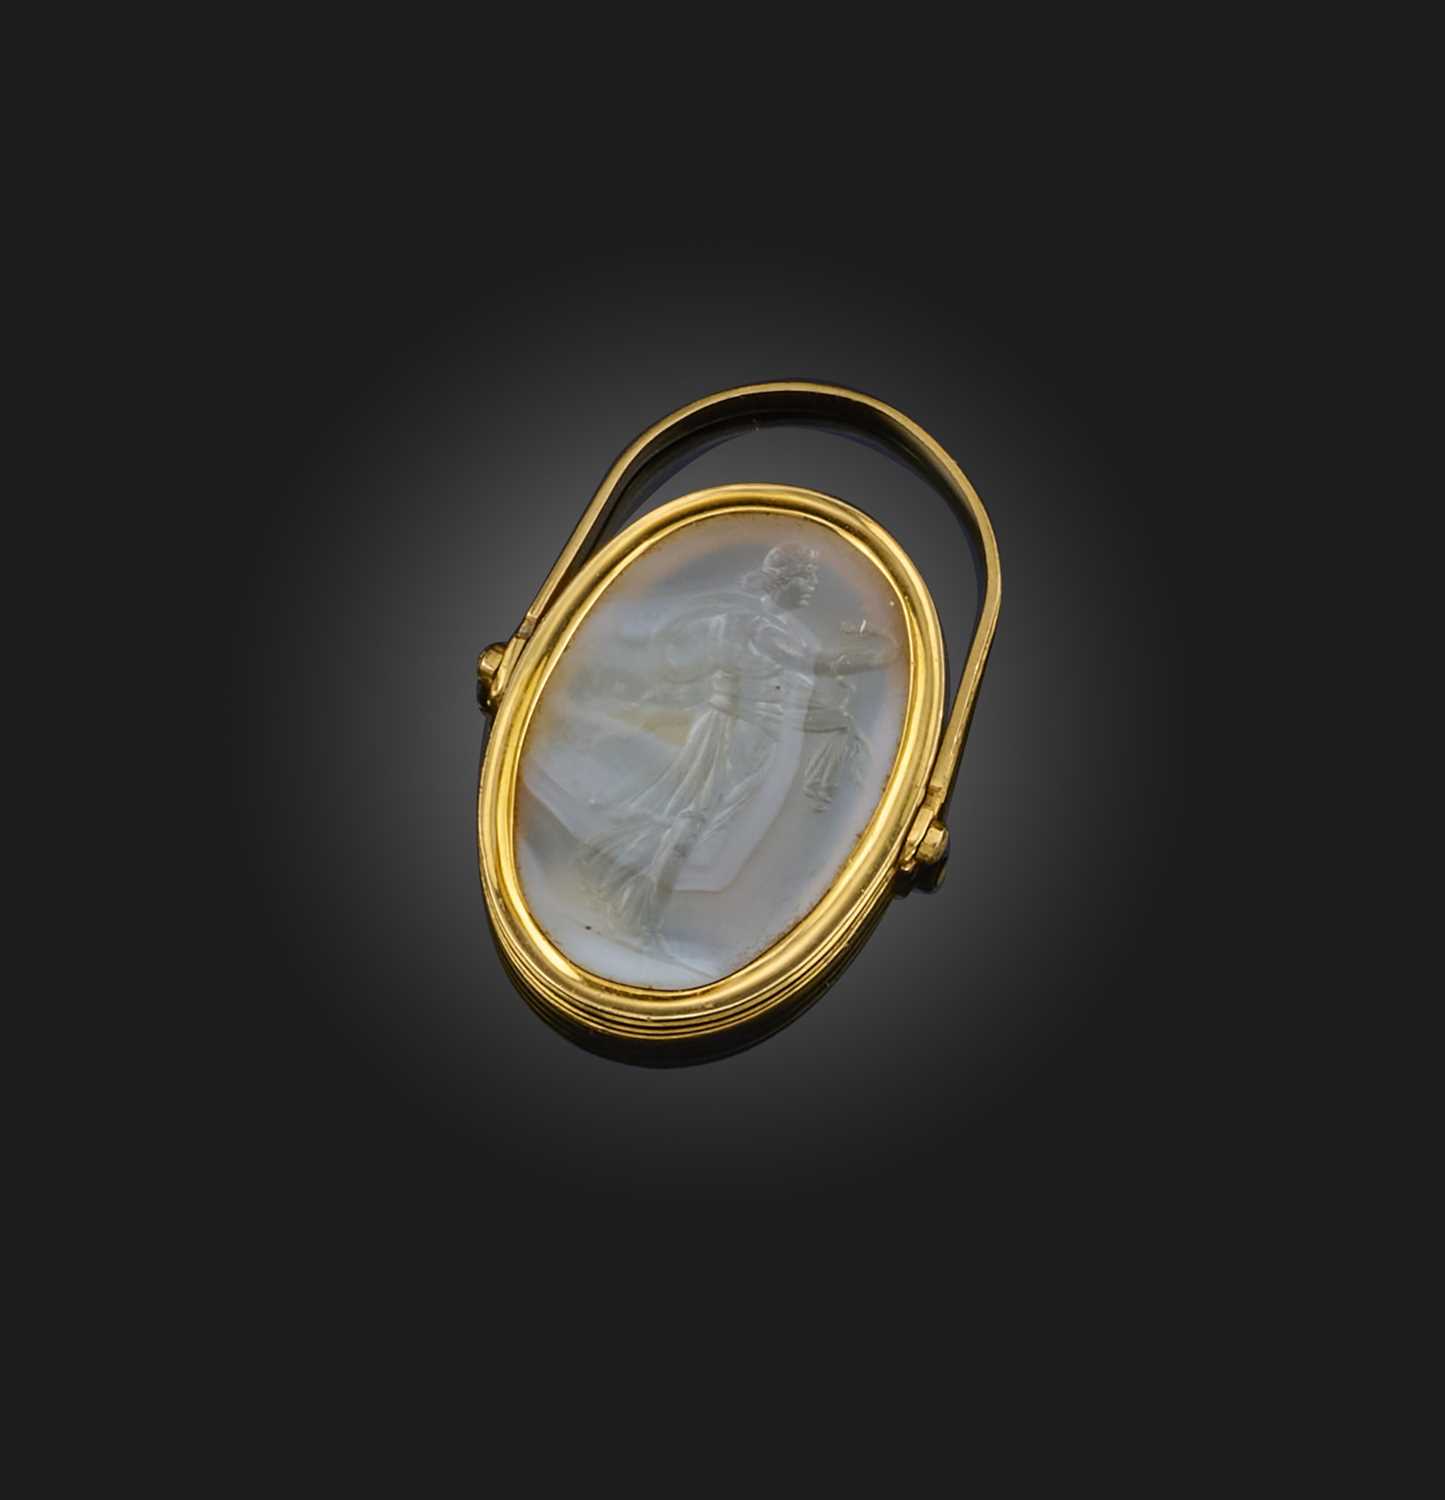 A neoclassical intaglio ring, early 19th century, the pale oval agate engraved with a depiction of